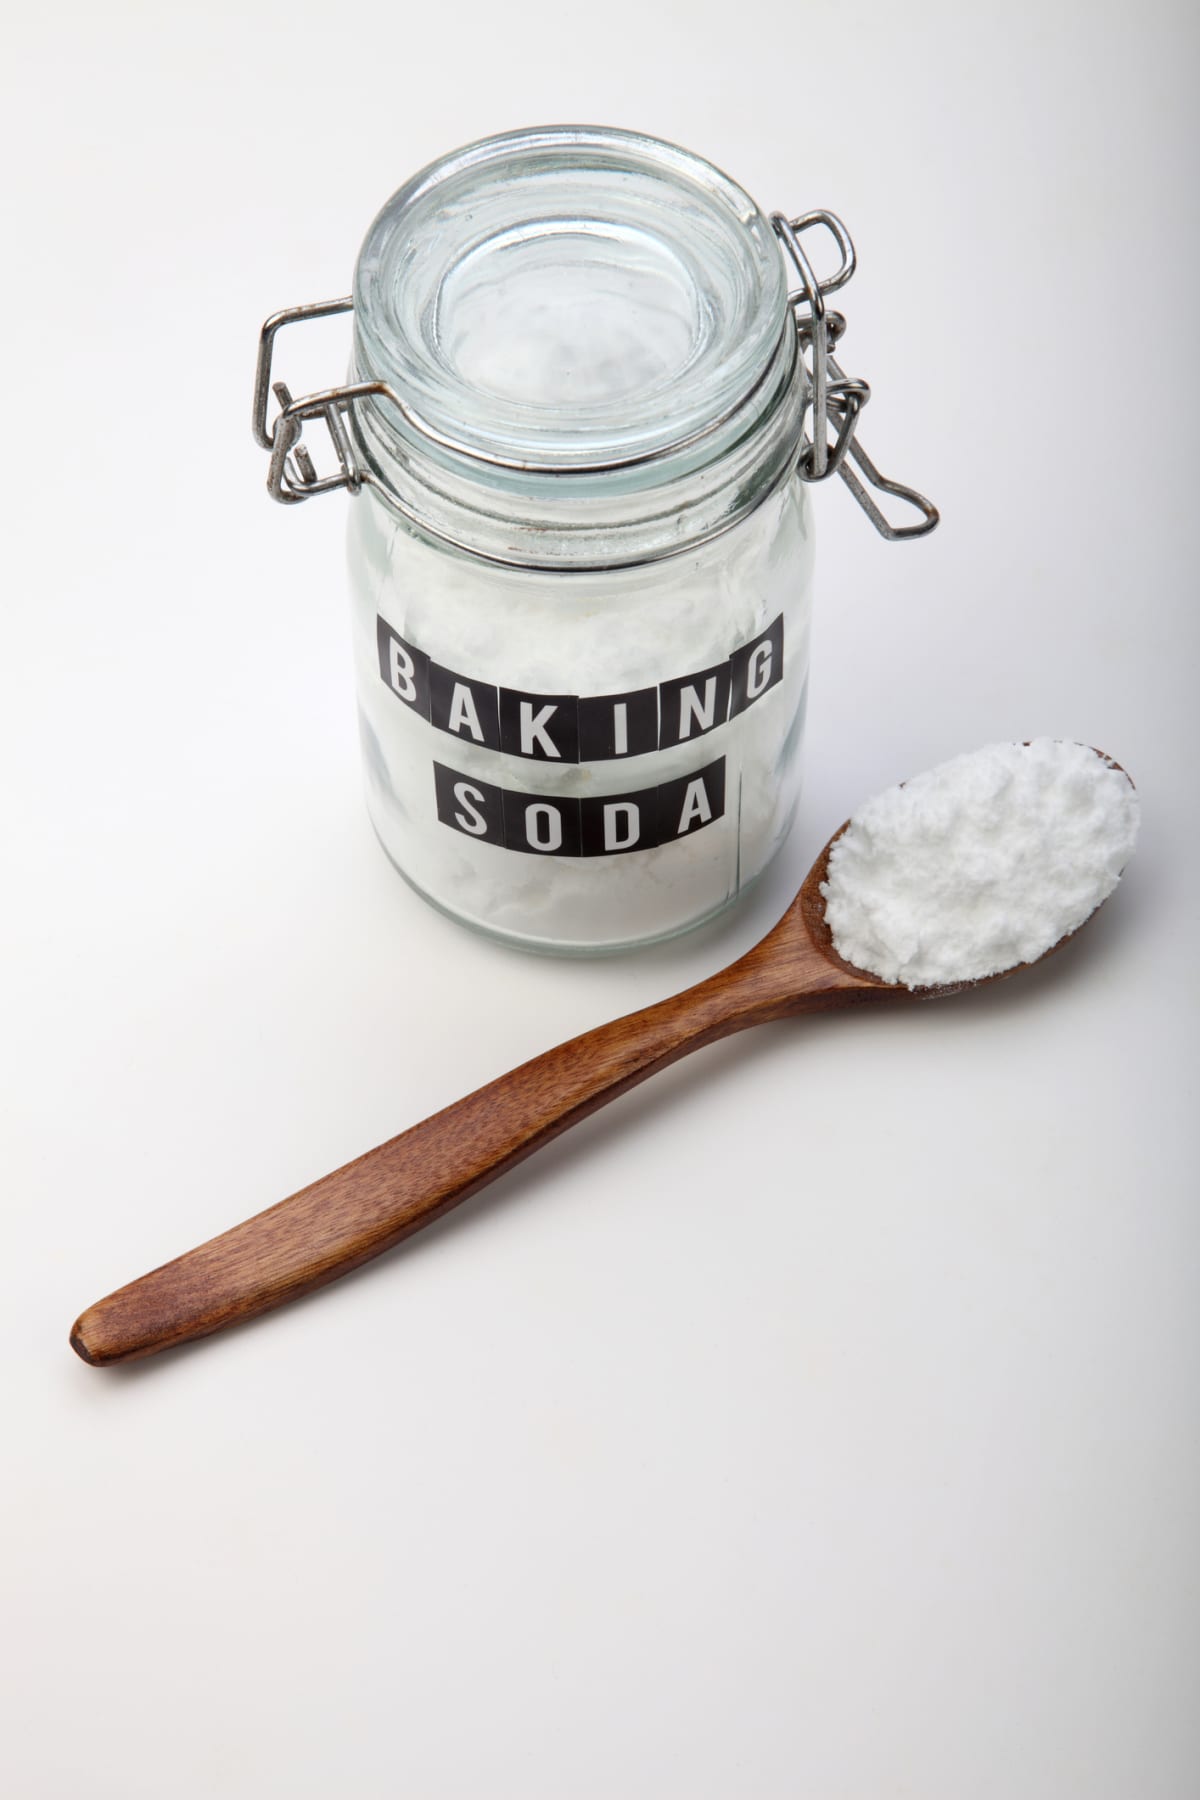 A jar of labeled baking soda and a wooden spoon to scoop it